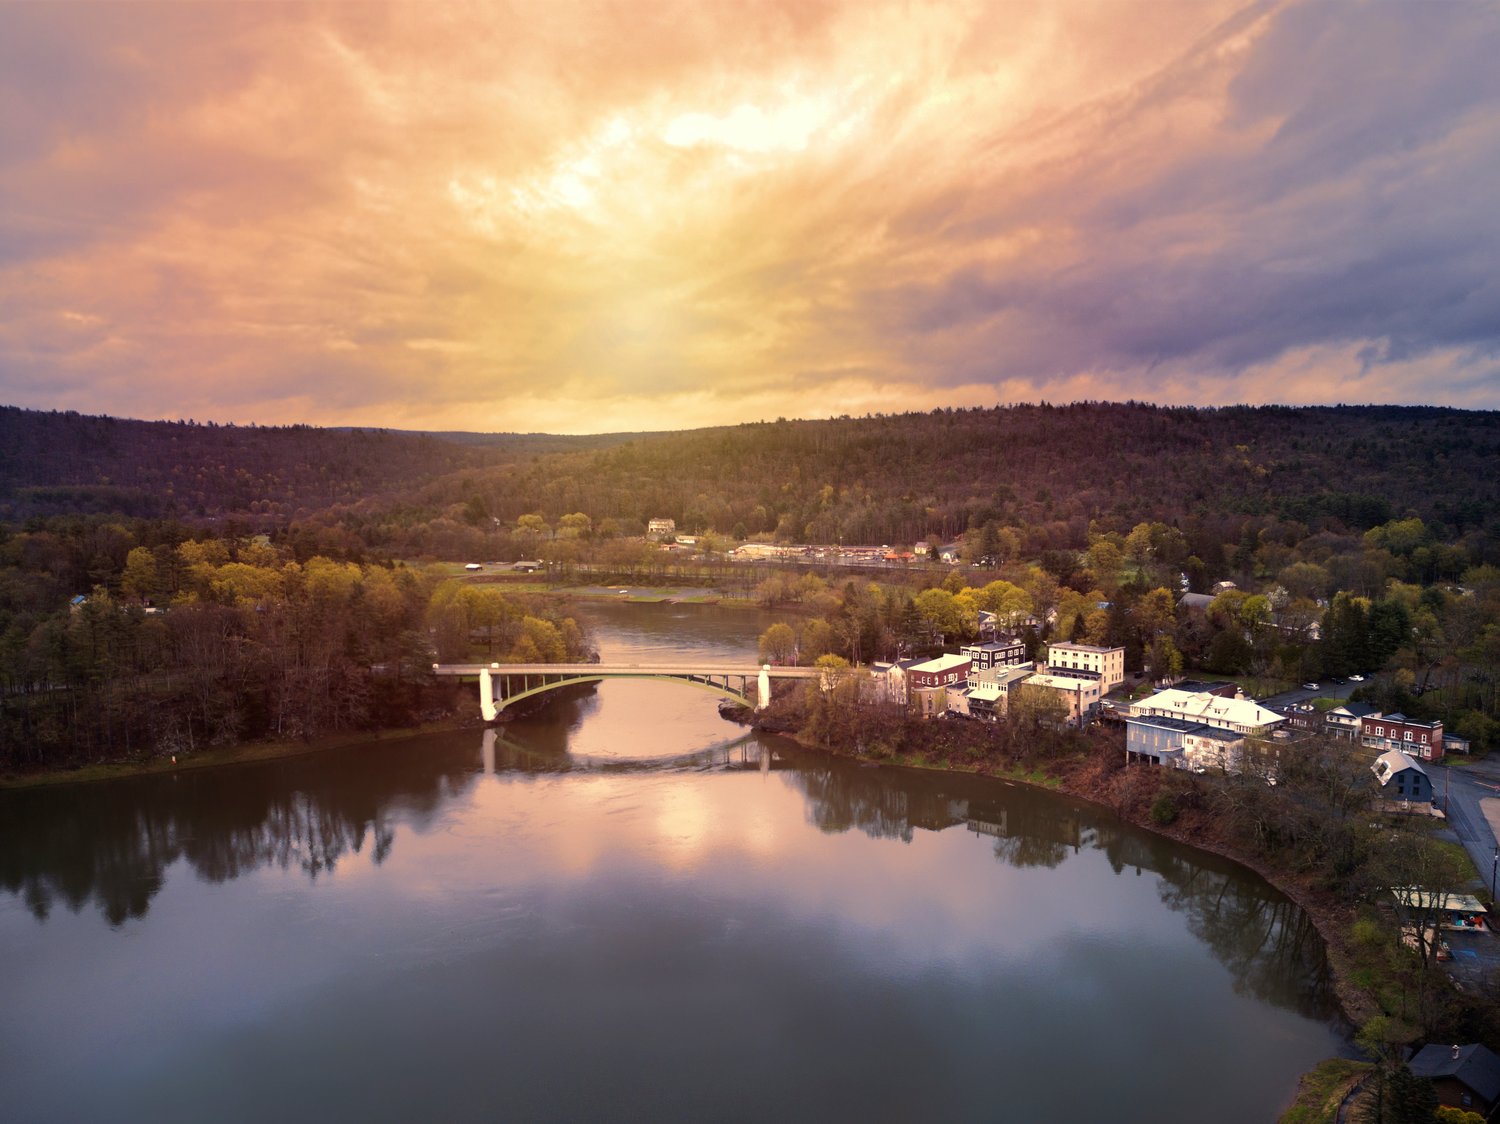 Narrowsburg dazzles. The beautiful river, the majestic eagles, the sense of history, the festivals, the parades, the charming bridge saying, “You can leave, but you’ll be back.”